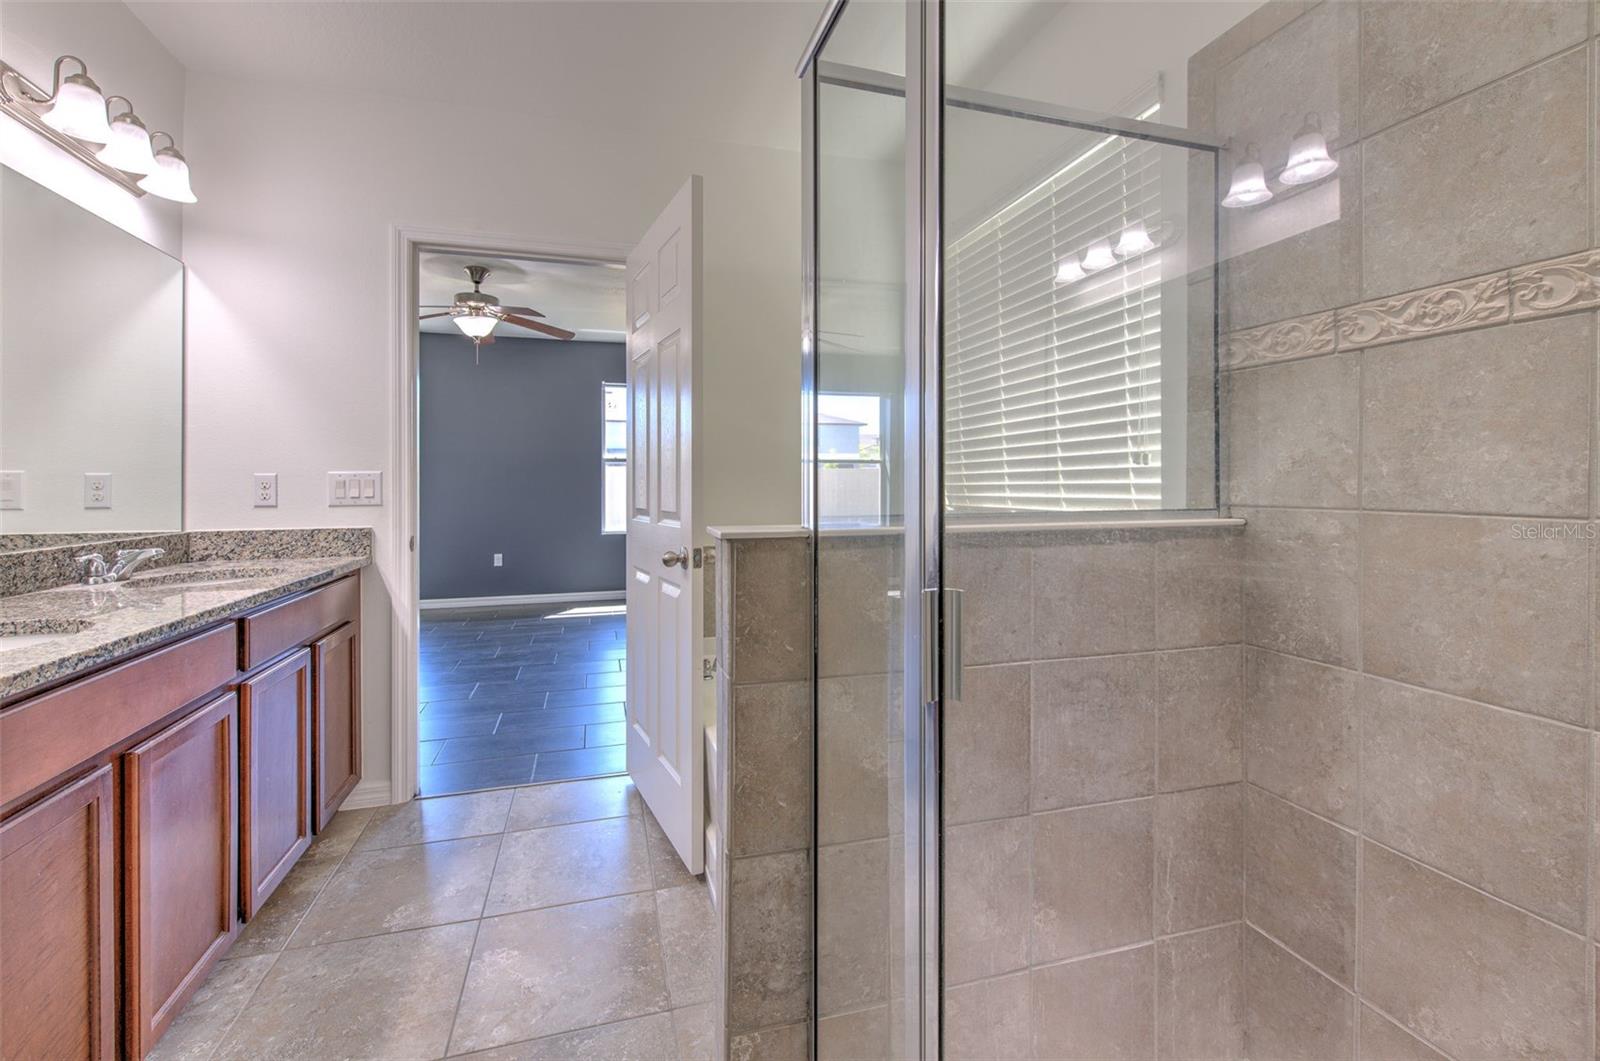 Both primary bathrooms include shower, garden tub, and dual vanity with granite counters.